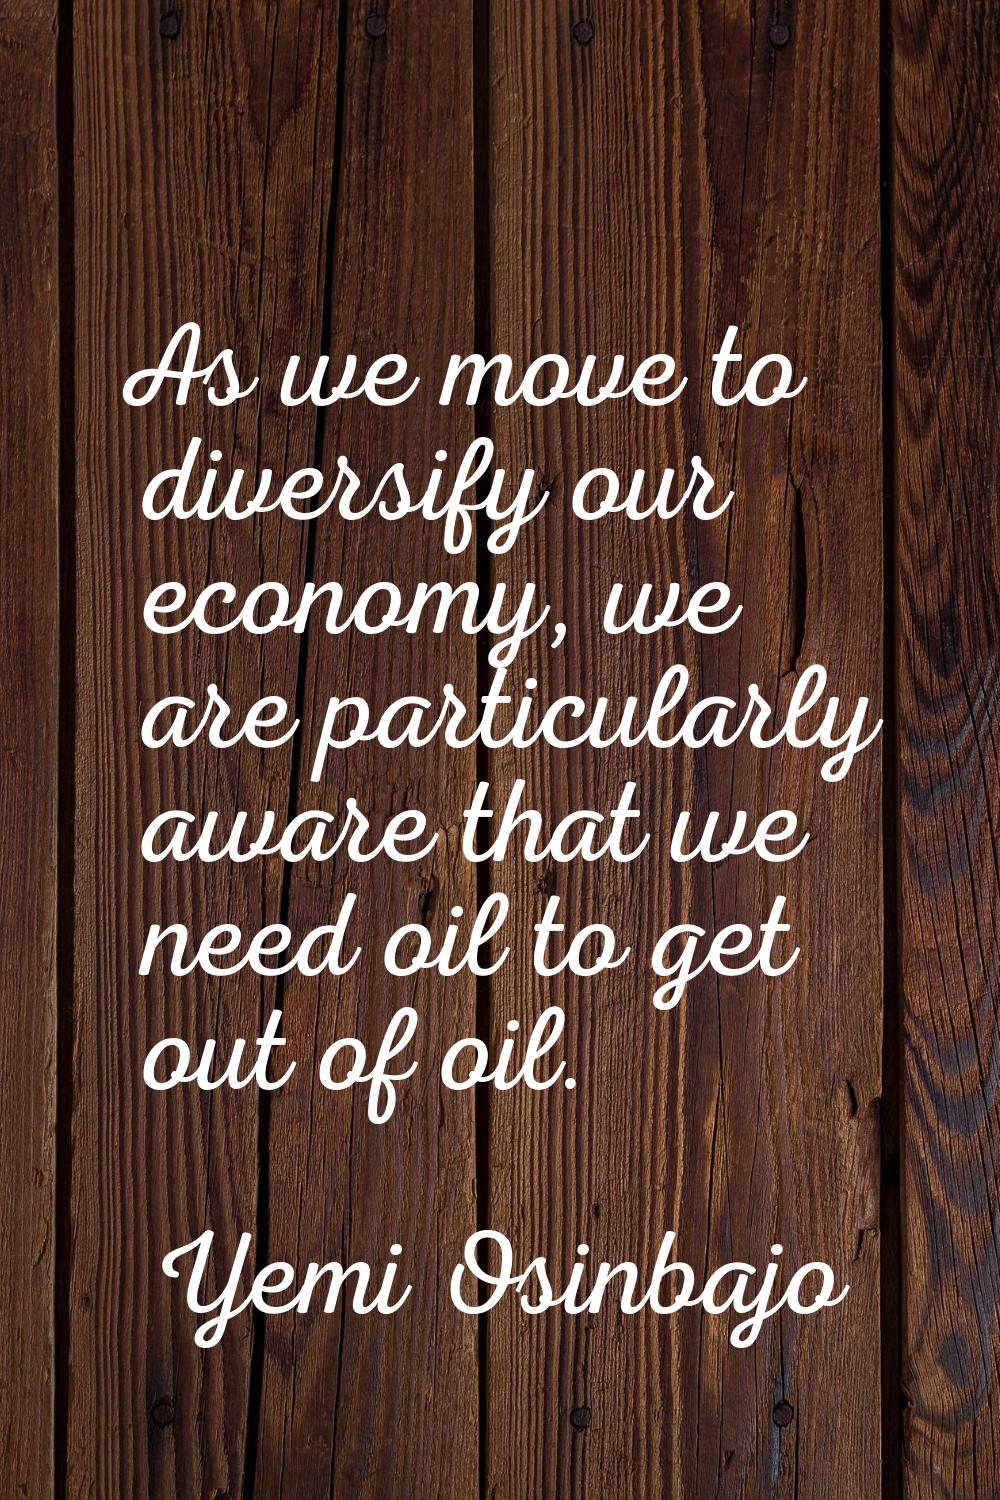 As we move to diversify our economy, we are particularly aware that we need oil to get out of oil.